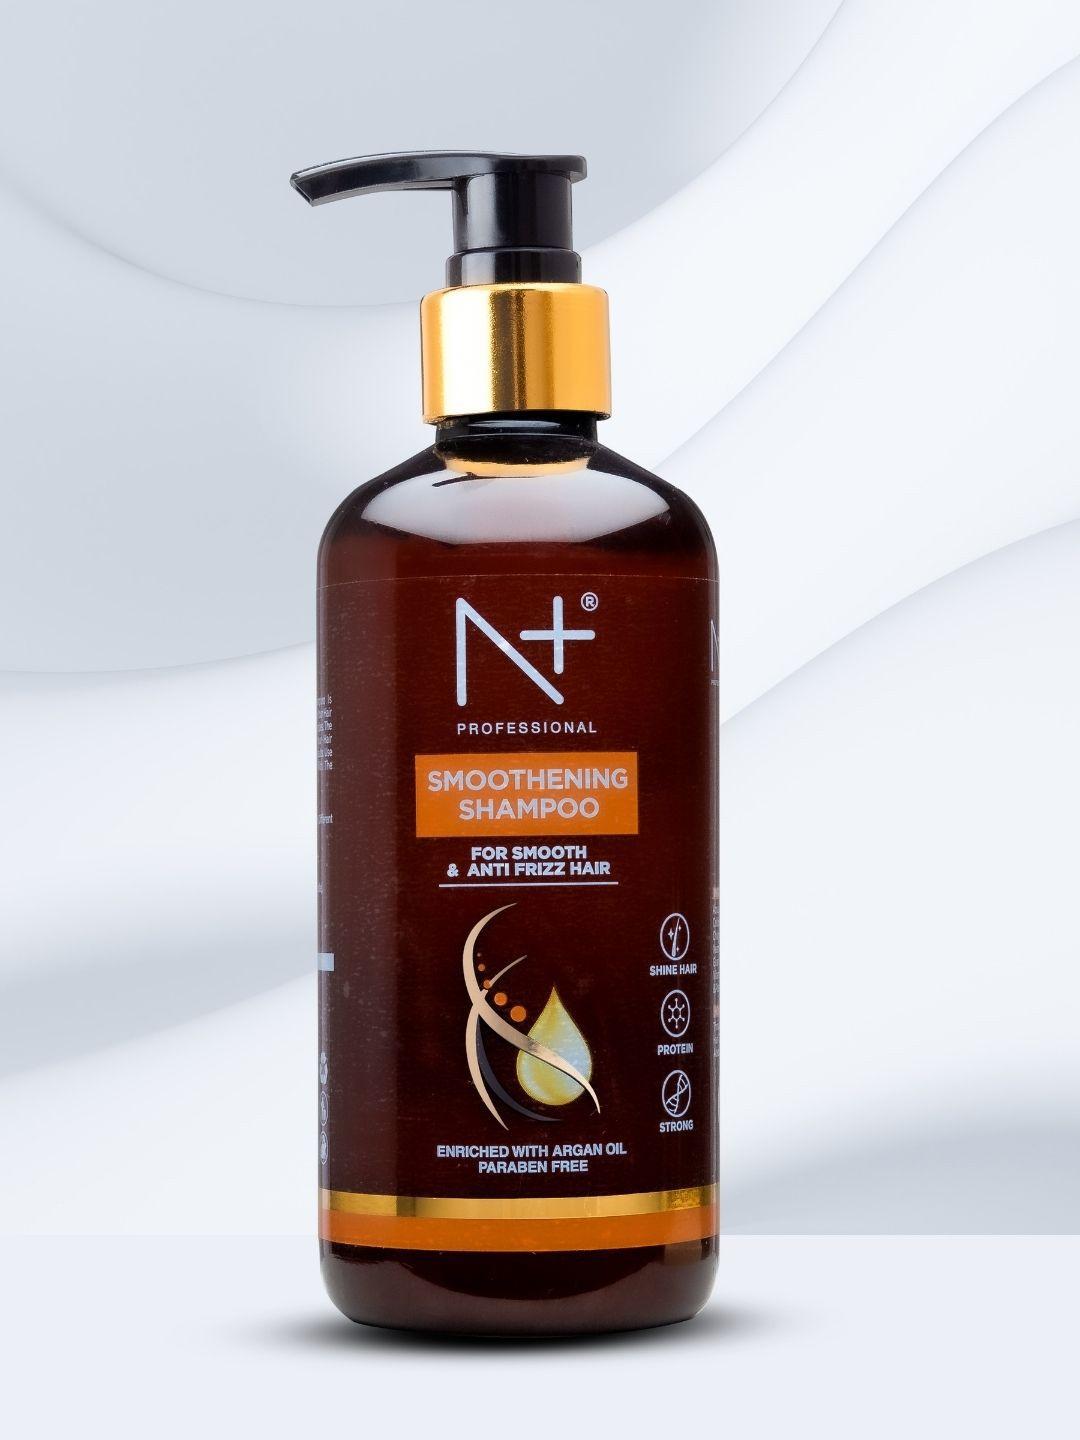 n plus professional smoothening shampoo with argan oil for smooth anti-frizz hair - 300ml